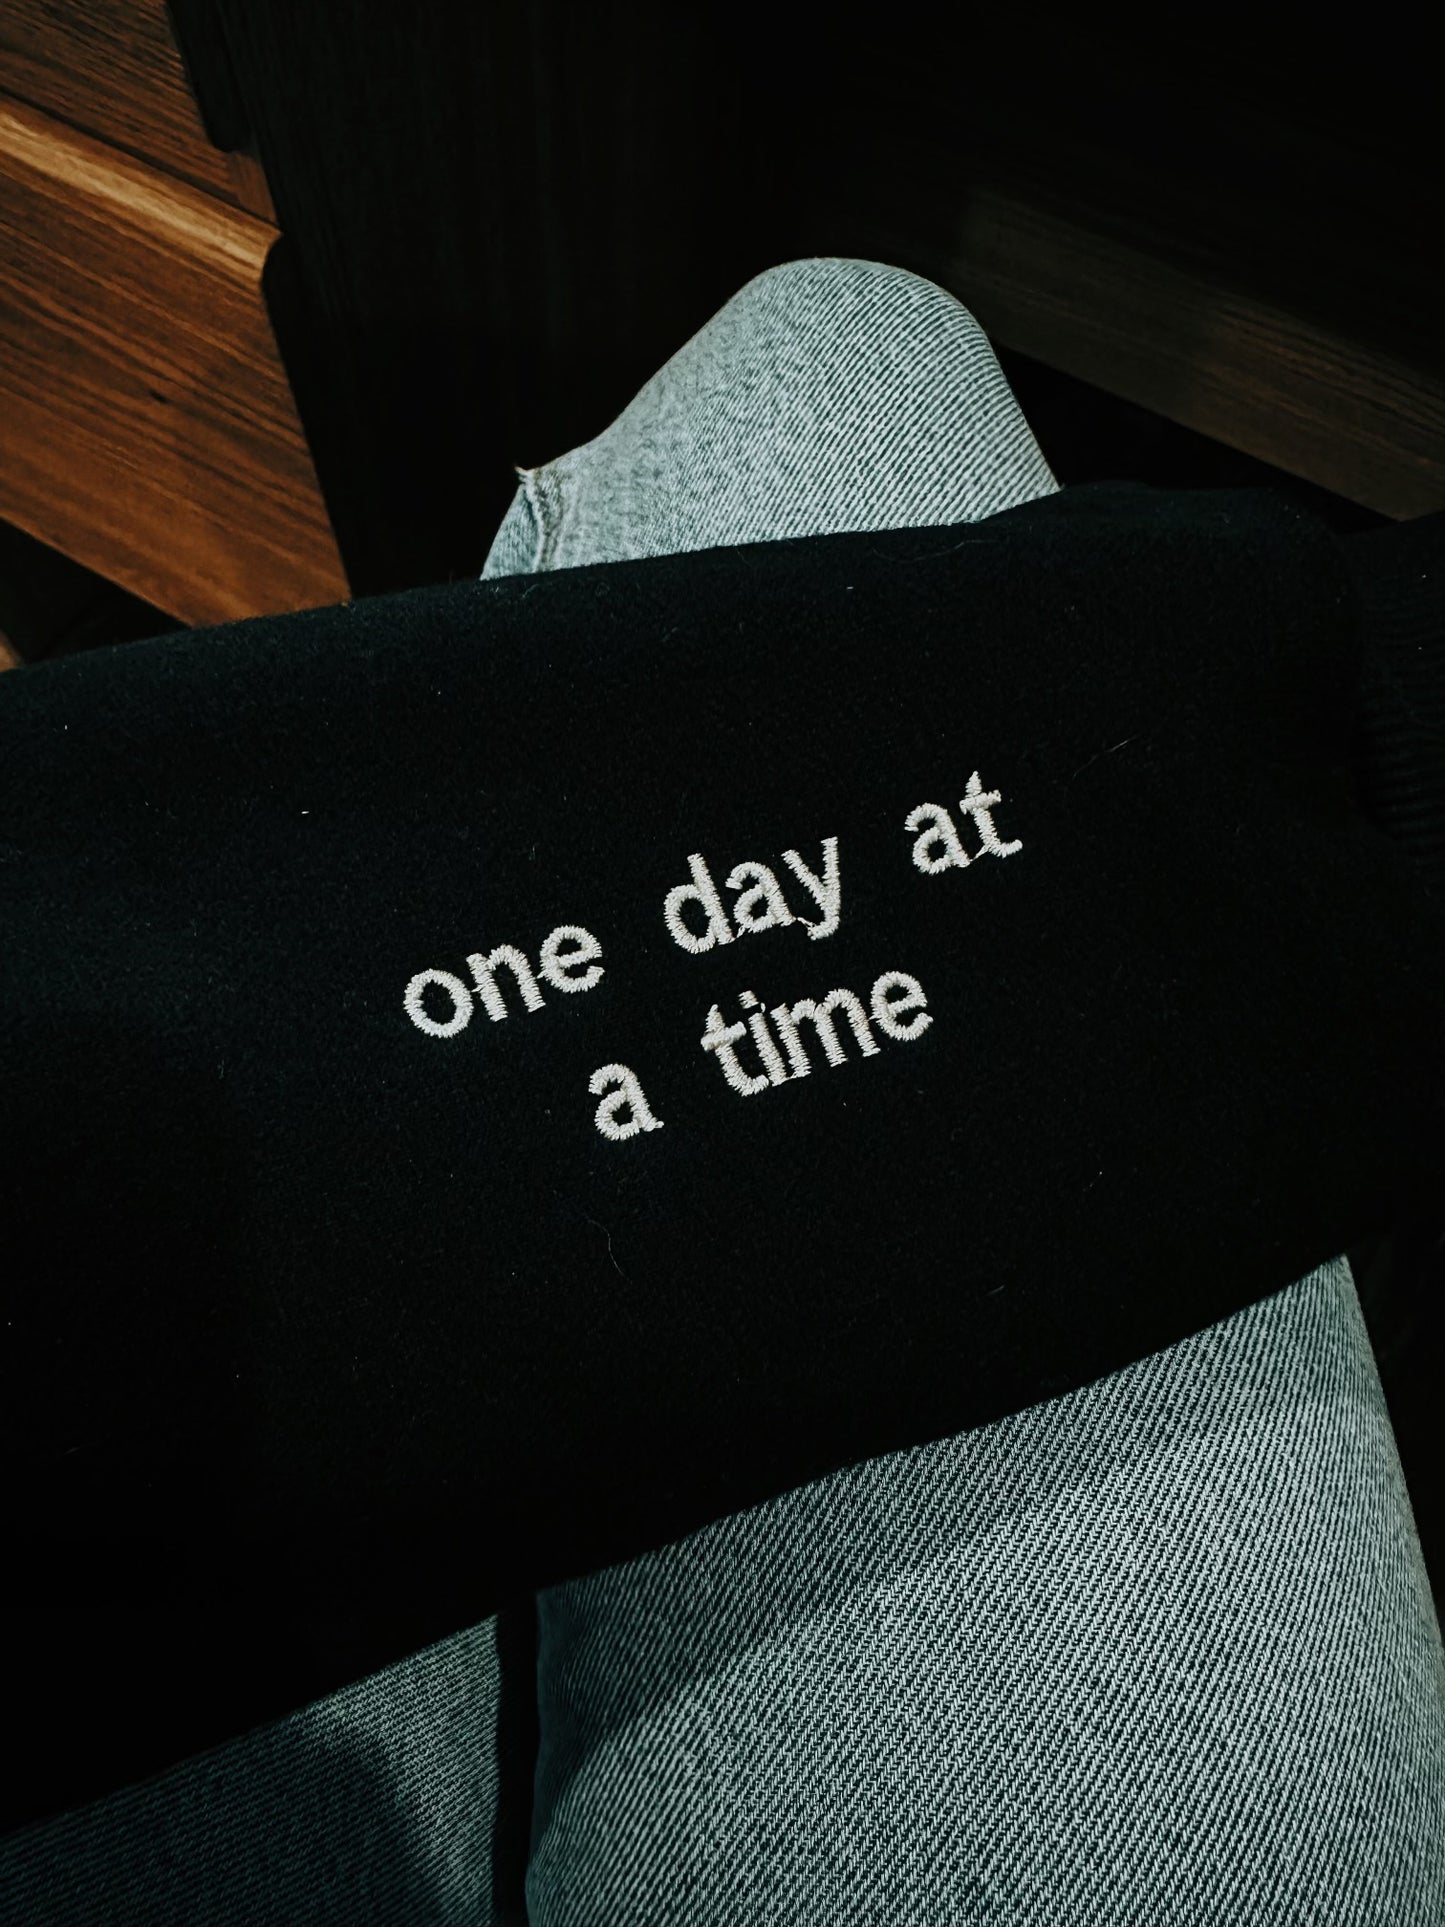 Sober "One Day at a Time" Crewneck